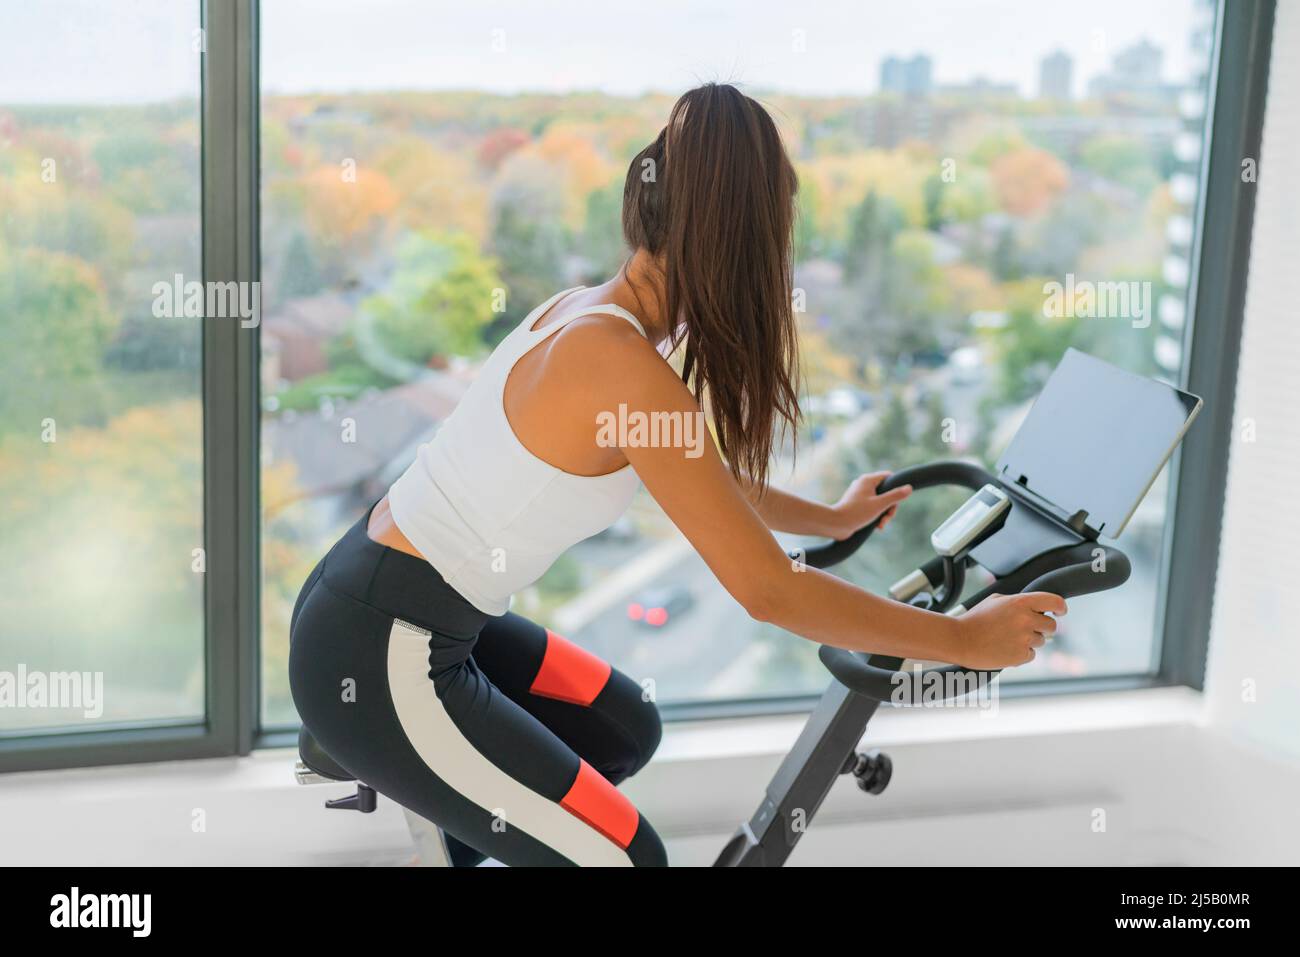 Exercise at home indoor cycling with online class on screen. Woman training cardio biking on workout spin bike active fitness lifestyle Stock Photo